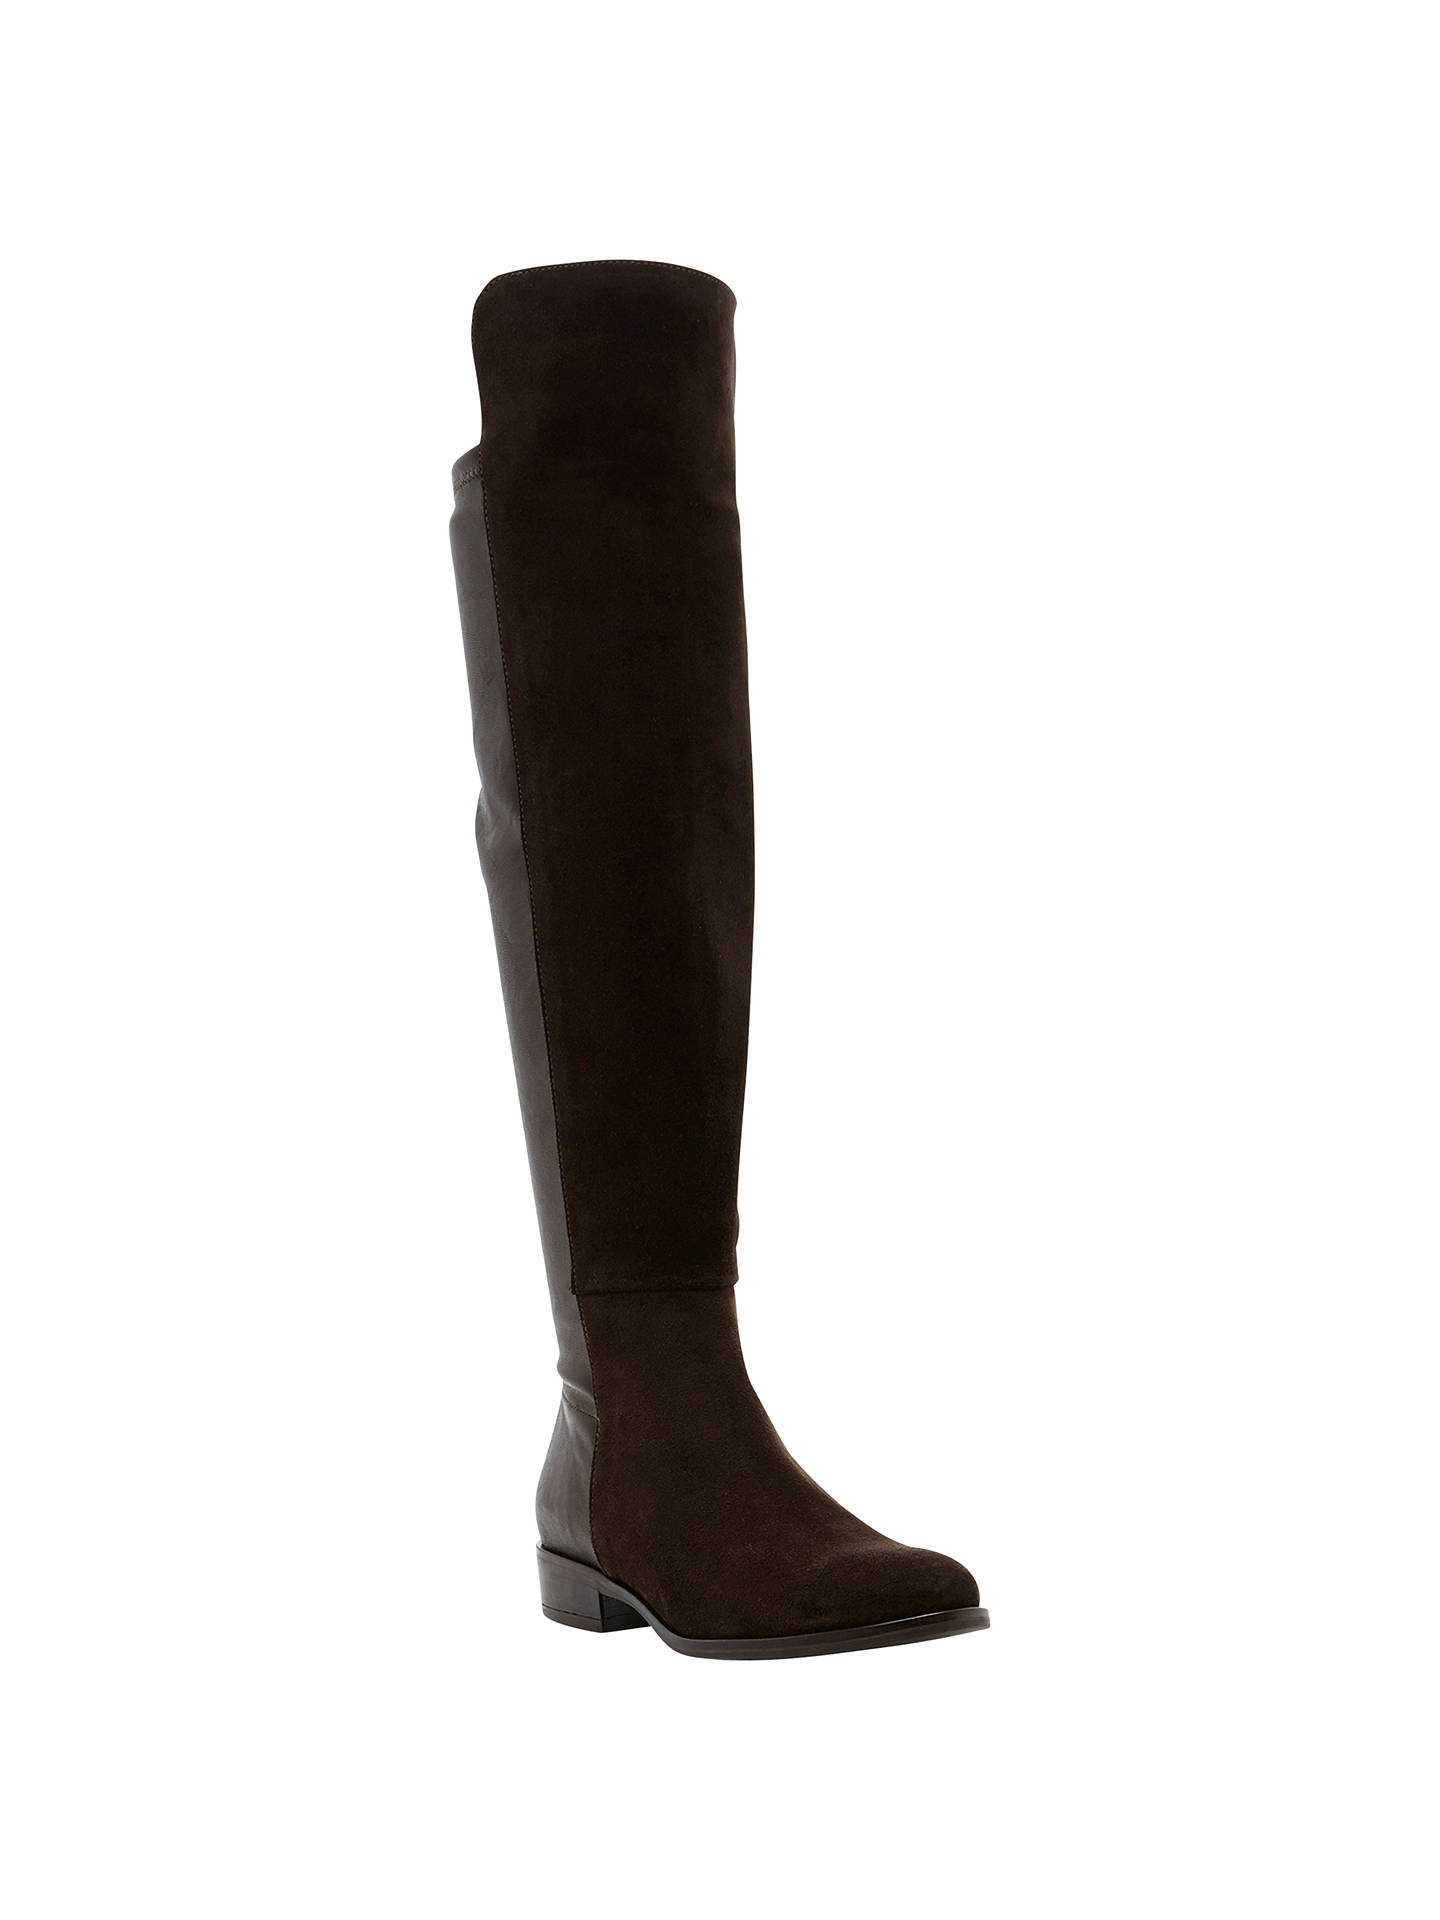 Dune Trish Over The Knee Boots, Brown Suede at John Lewis & Partners